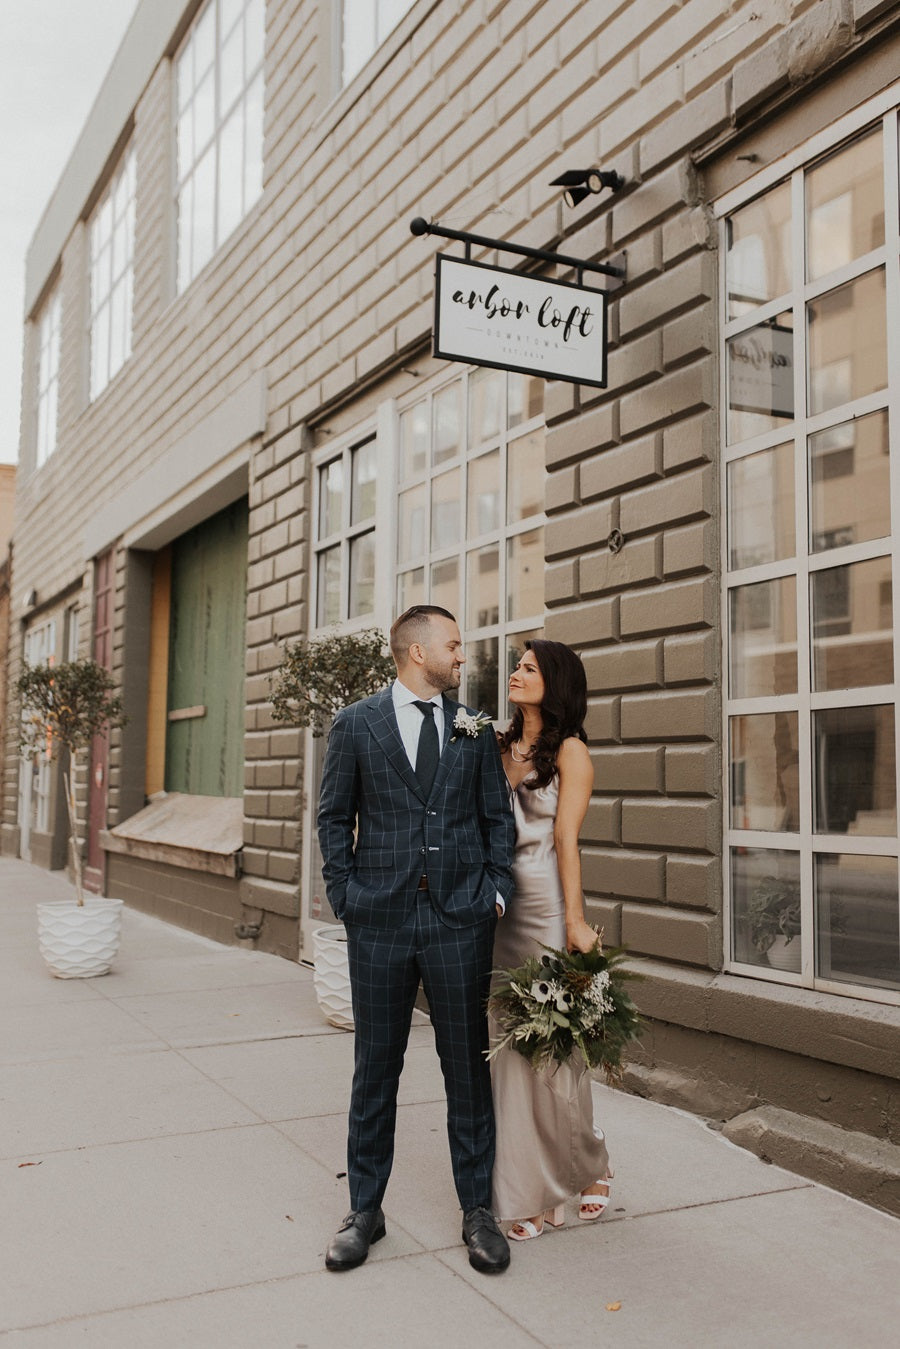 Bride and groom pose outside of Arbor Loft. Bride is dressed in silver, holding her bridal bouquet.